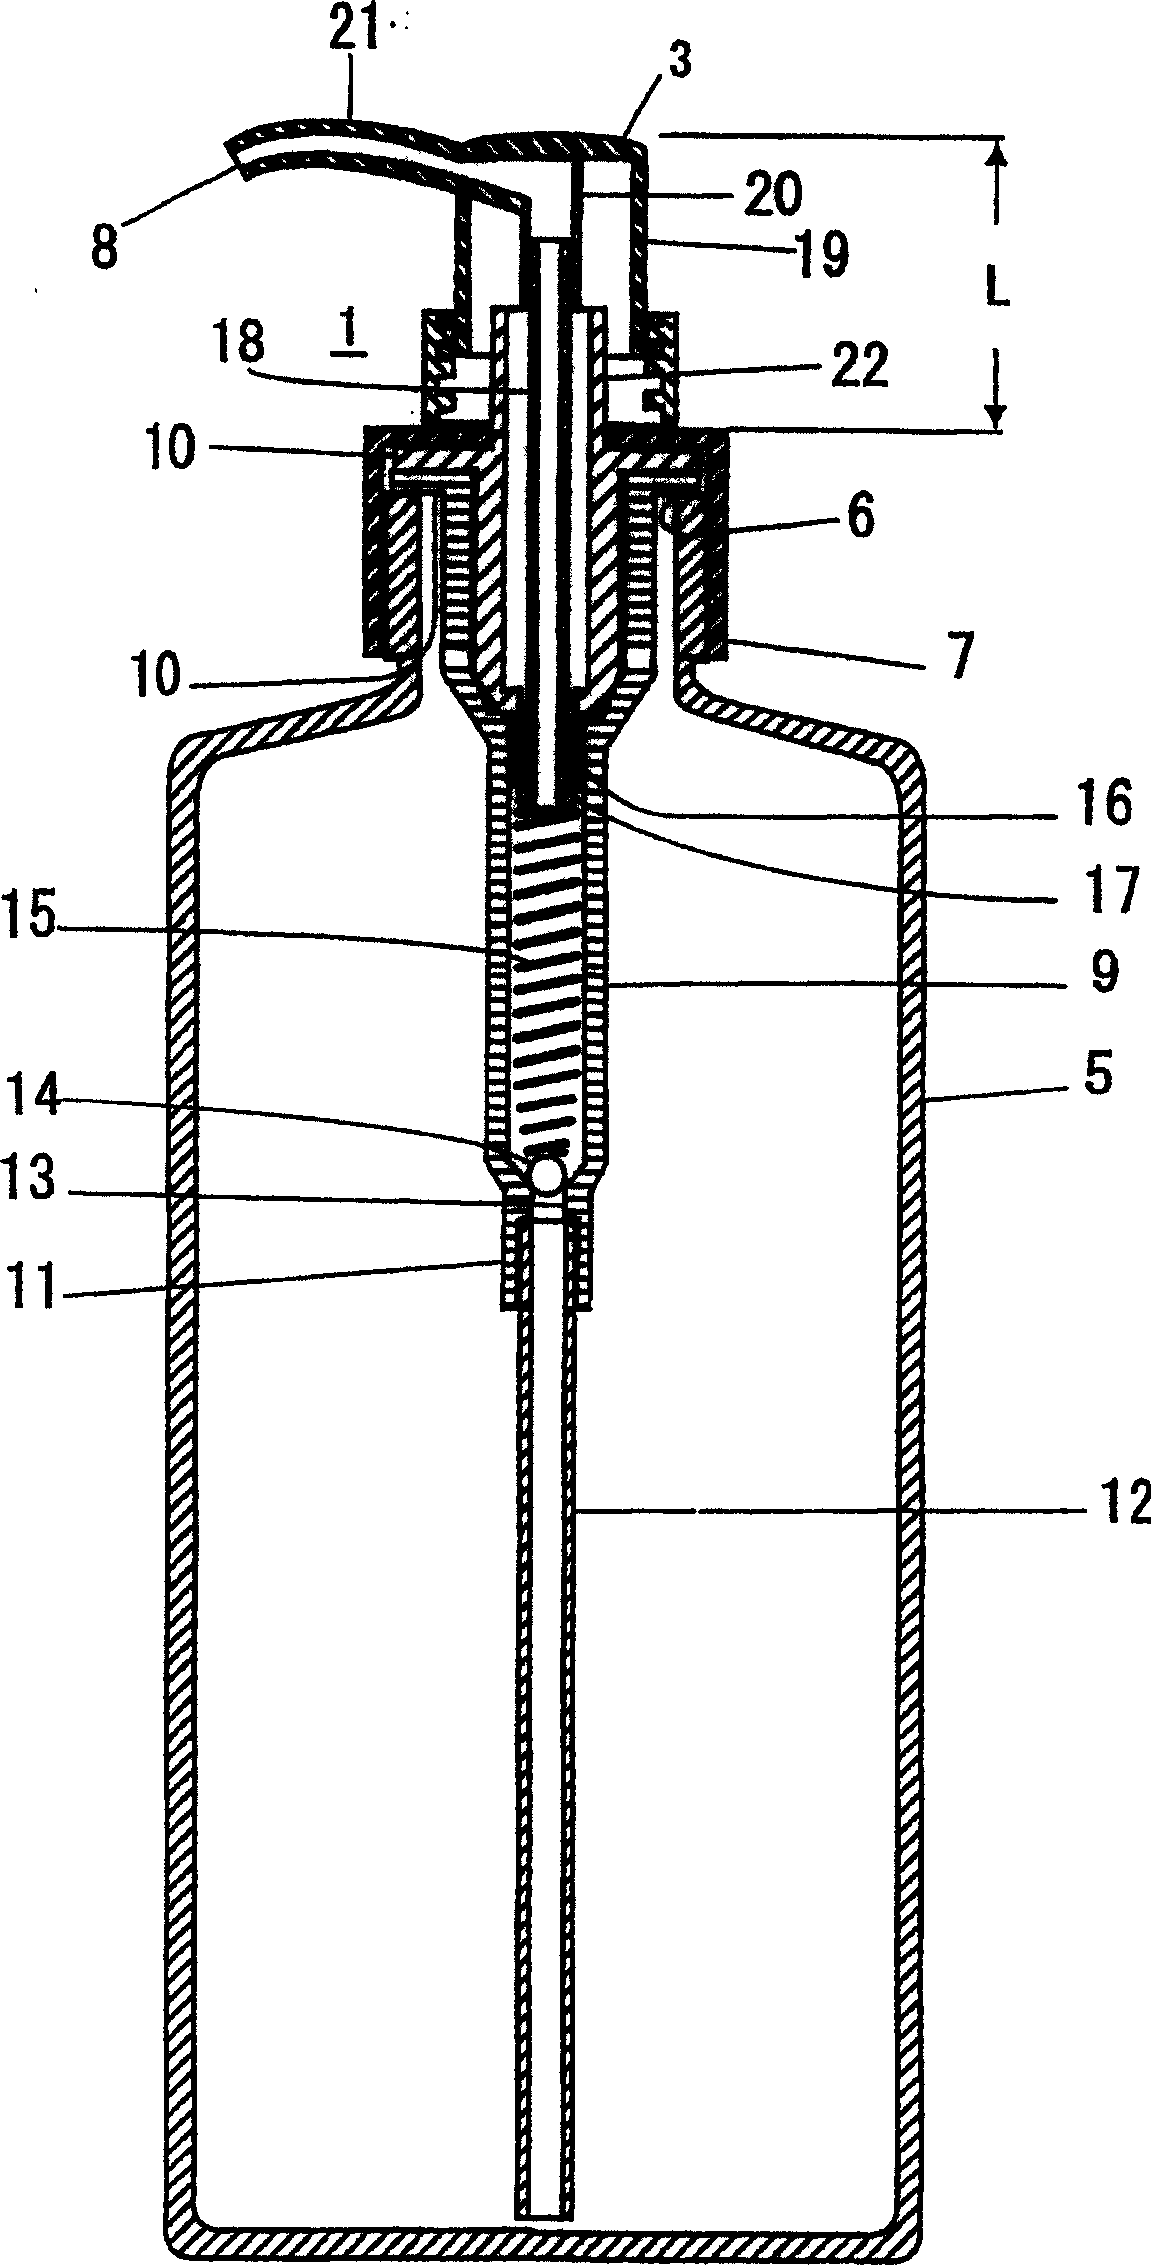 Pump with function of measuring fixed amount